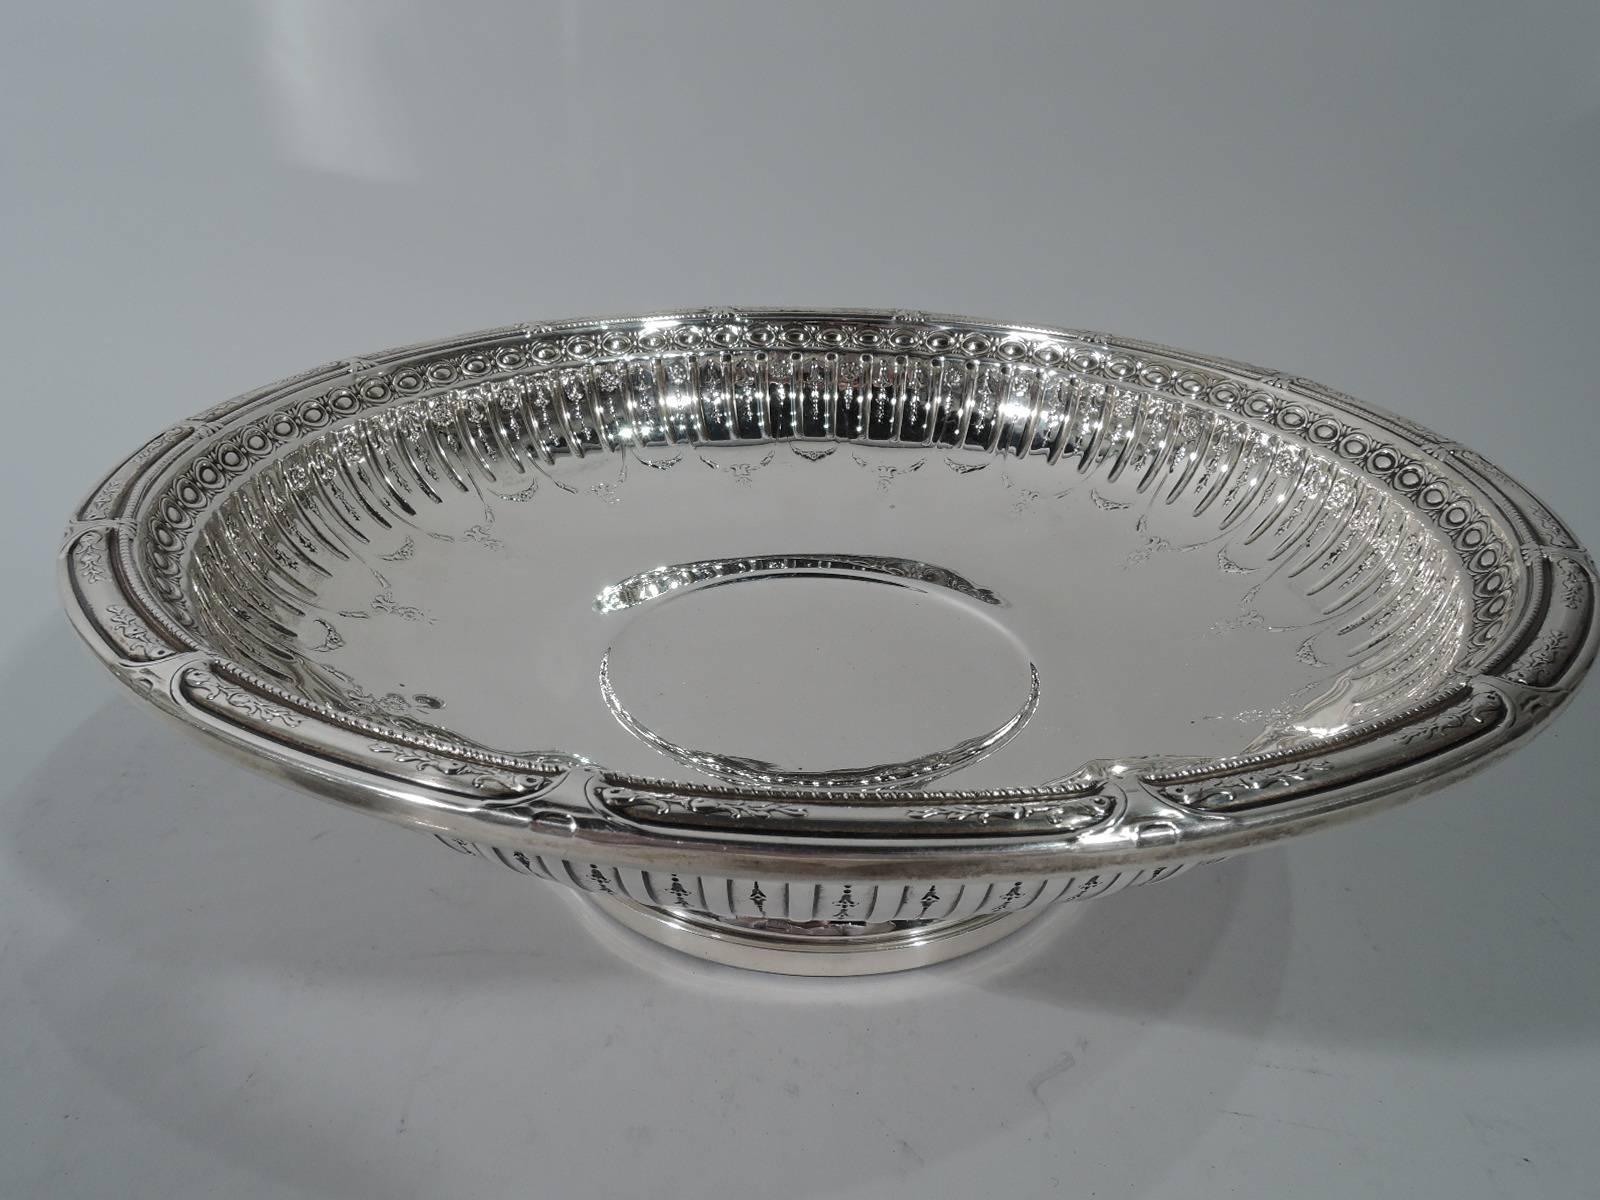 French neoclassical sterling silver bowl in Marie Antoinette pattern. Made by Gorham in Providence in 1953. Round and shallow on stepped foot. Chased ornament: Alternating flutes and flowers with garlands. Rim has tubular frames with flowers.